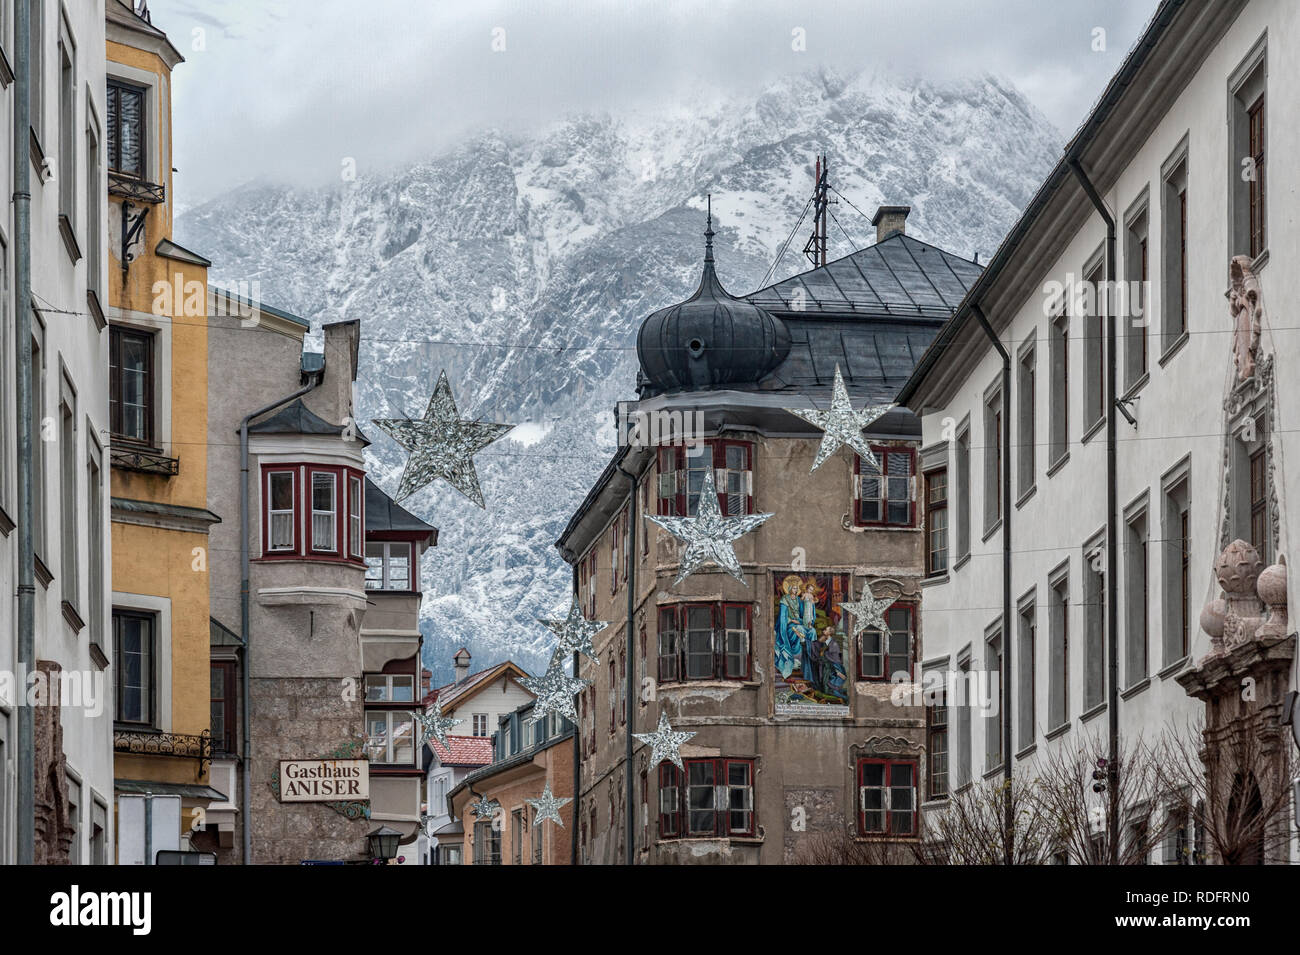 HALL IN TIROL, AUSTRIA - DECEMBER, 30 2018: Traditional buildings and colorful facades of houses in the medieval town of Hall in Tyrol, Austria Stock Photo